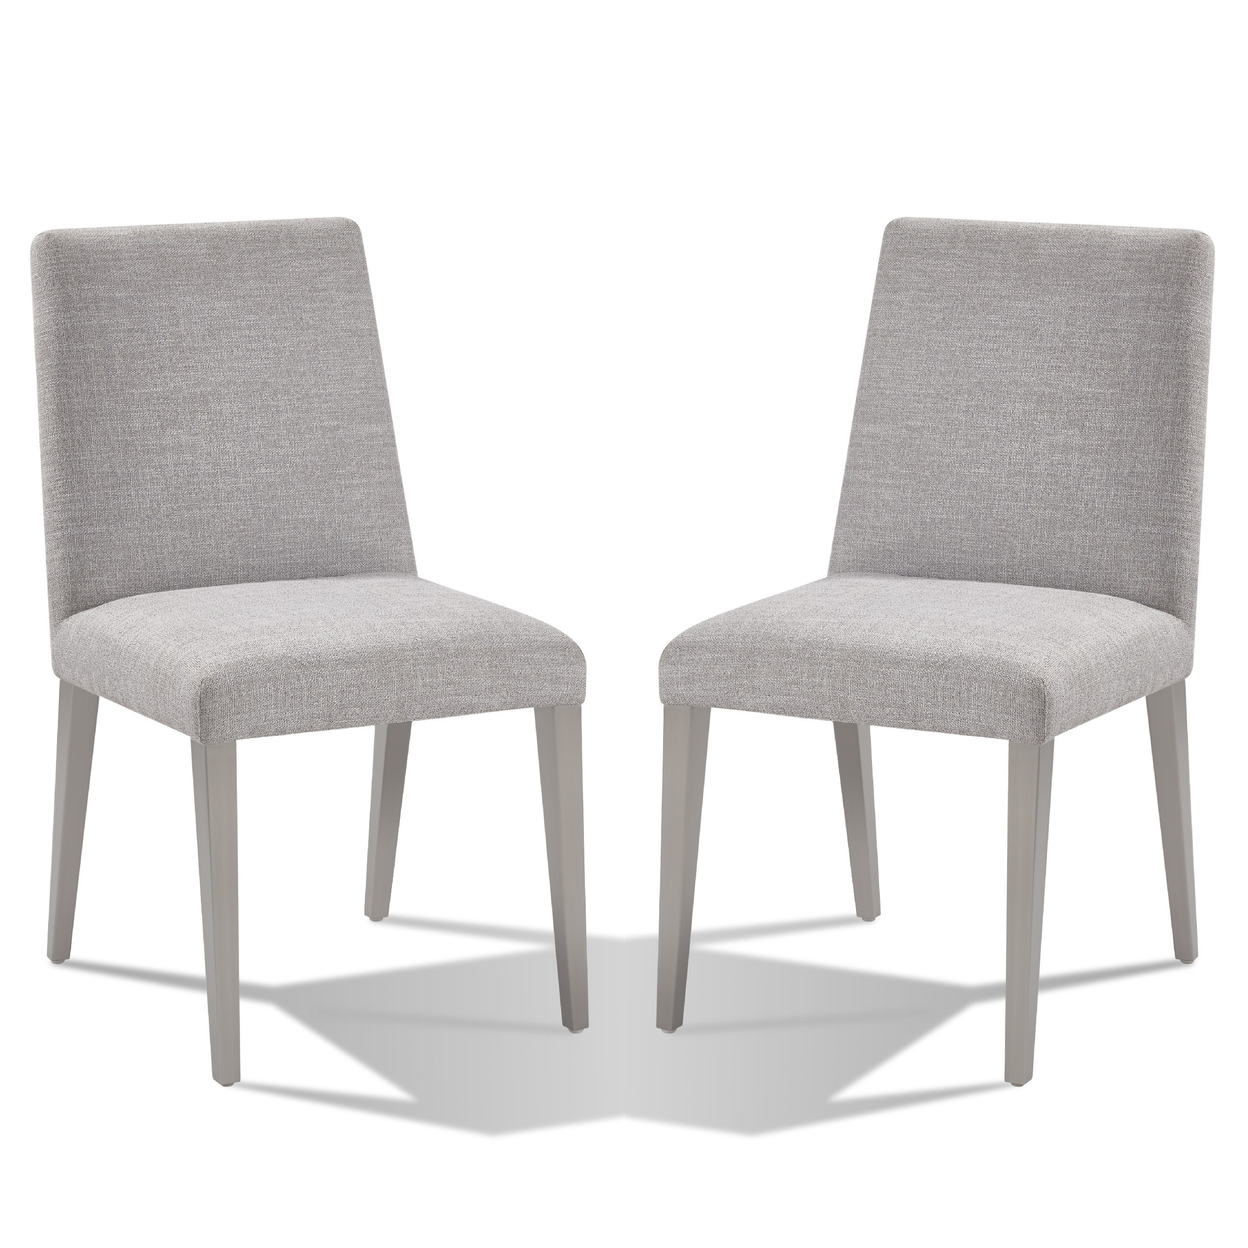 Hal 18 Inch Parson Dining Chair, Fabric Upholstered, Set Of 2, Silver, Gray- Saltoro Sherpi